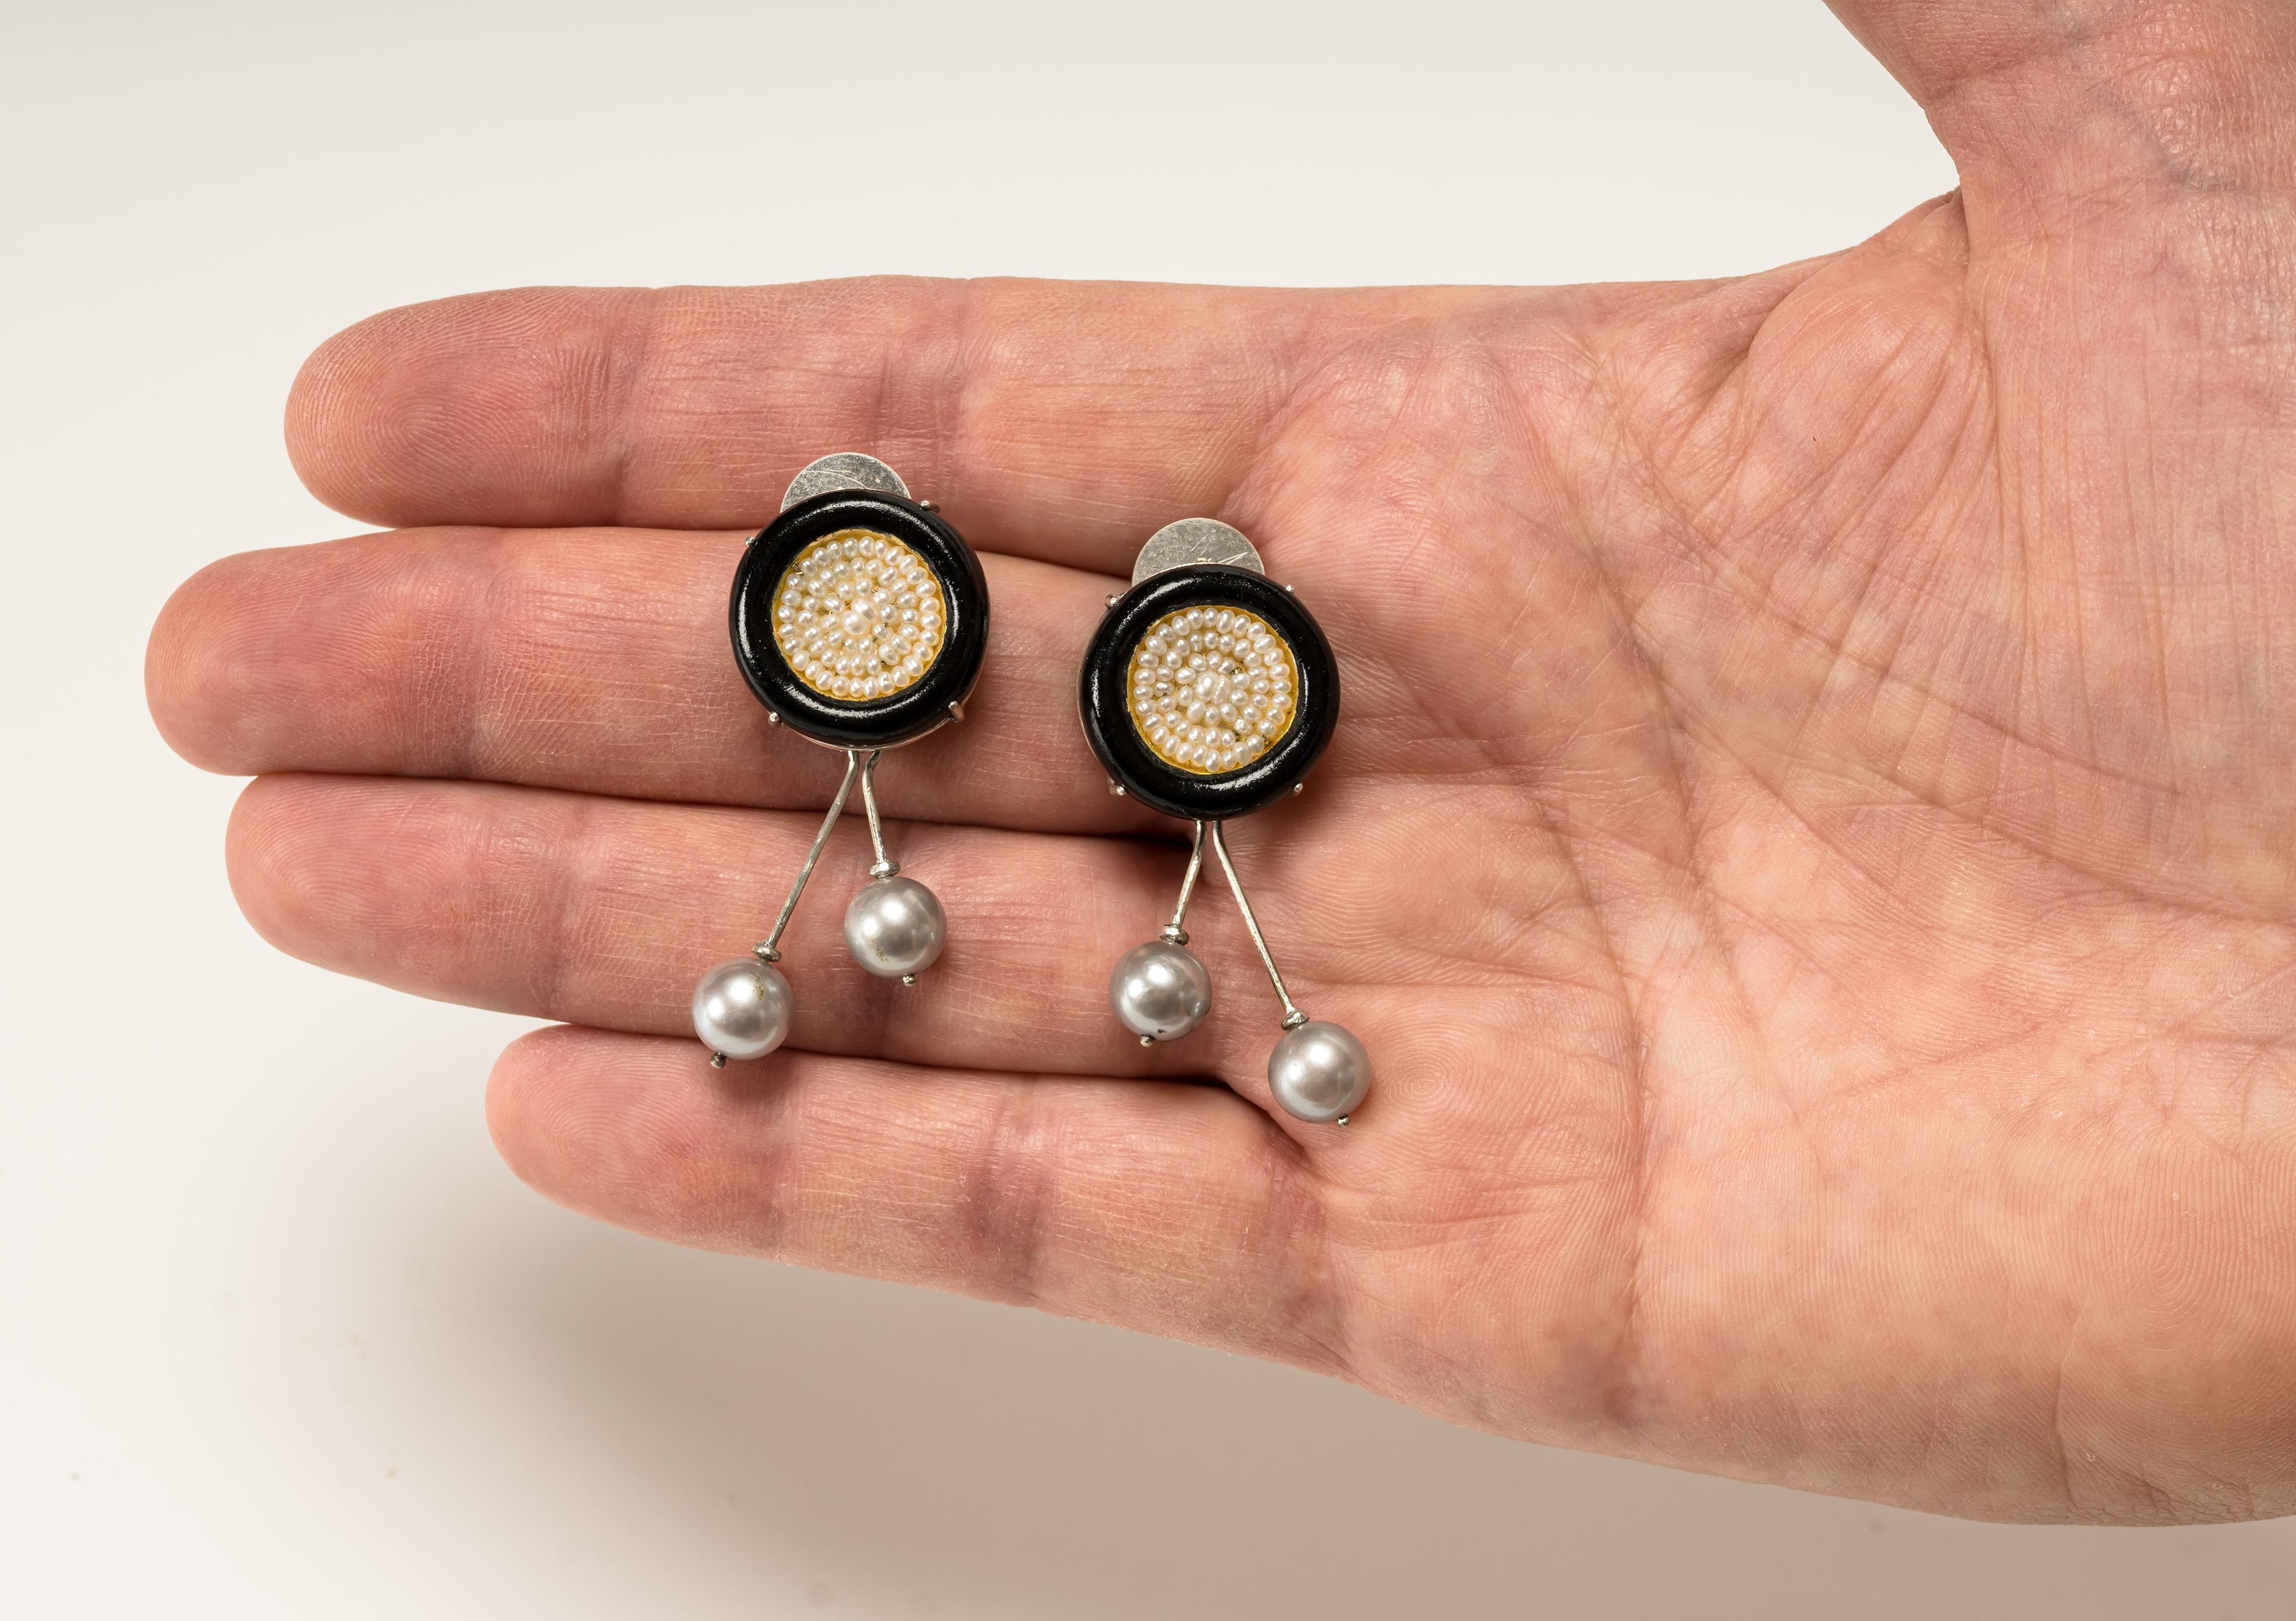 Earrings “Ribes 3”, 2022, are a limited edition contemporary author jewelry by italian artist Gian Luca Bartellone.
Materials: papier-mâché, silver, gold 18kt, pearls, gold leaf 22kt.

The main round body is made of papier-mâché and is hand-painted